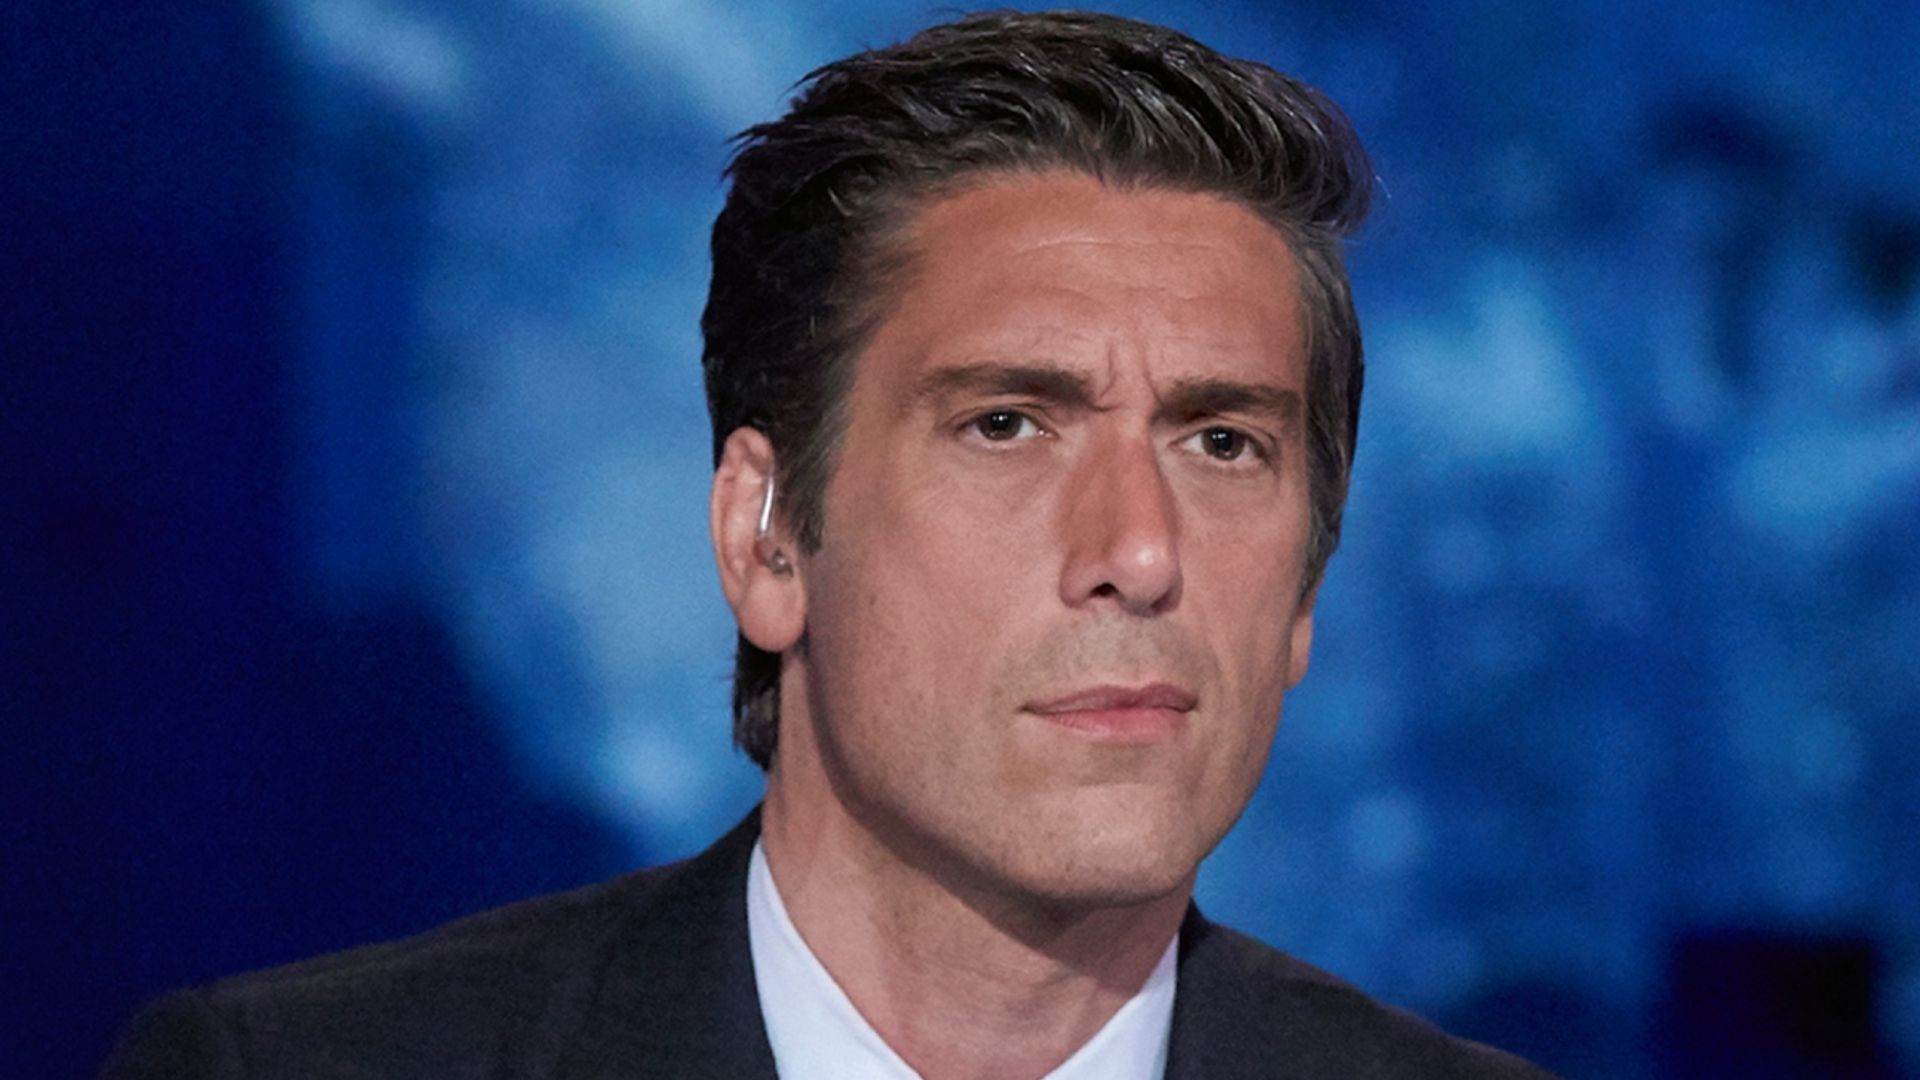 ABC's David Muir shares emotional story that sparks reaction